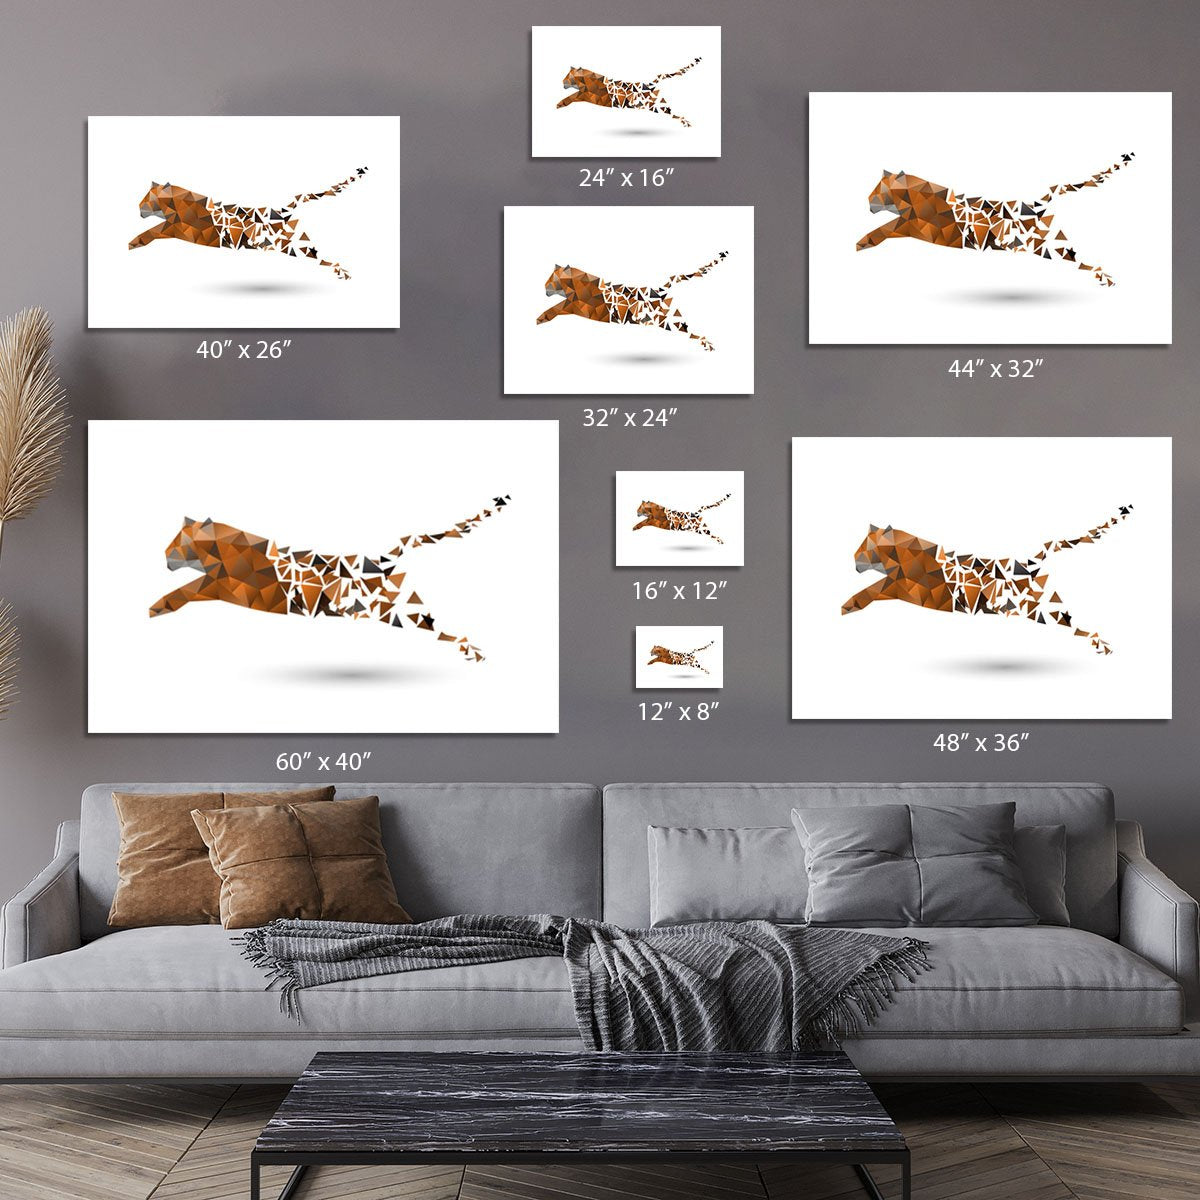 Leaping tiger made from polygons Canvas Print or Poster